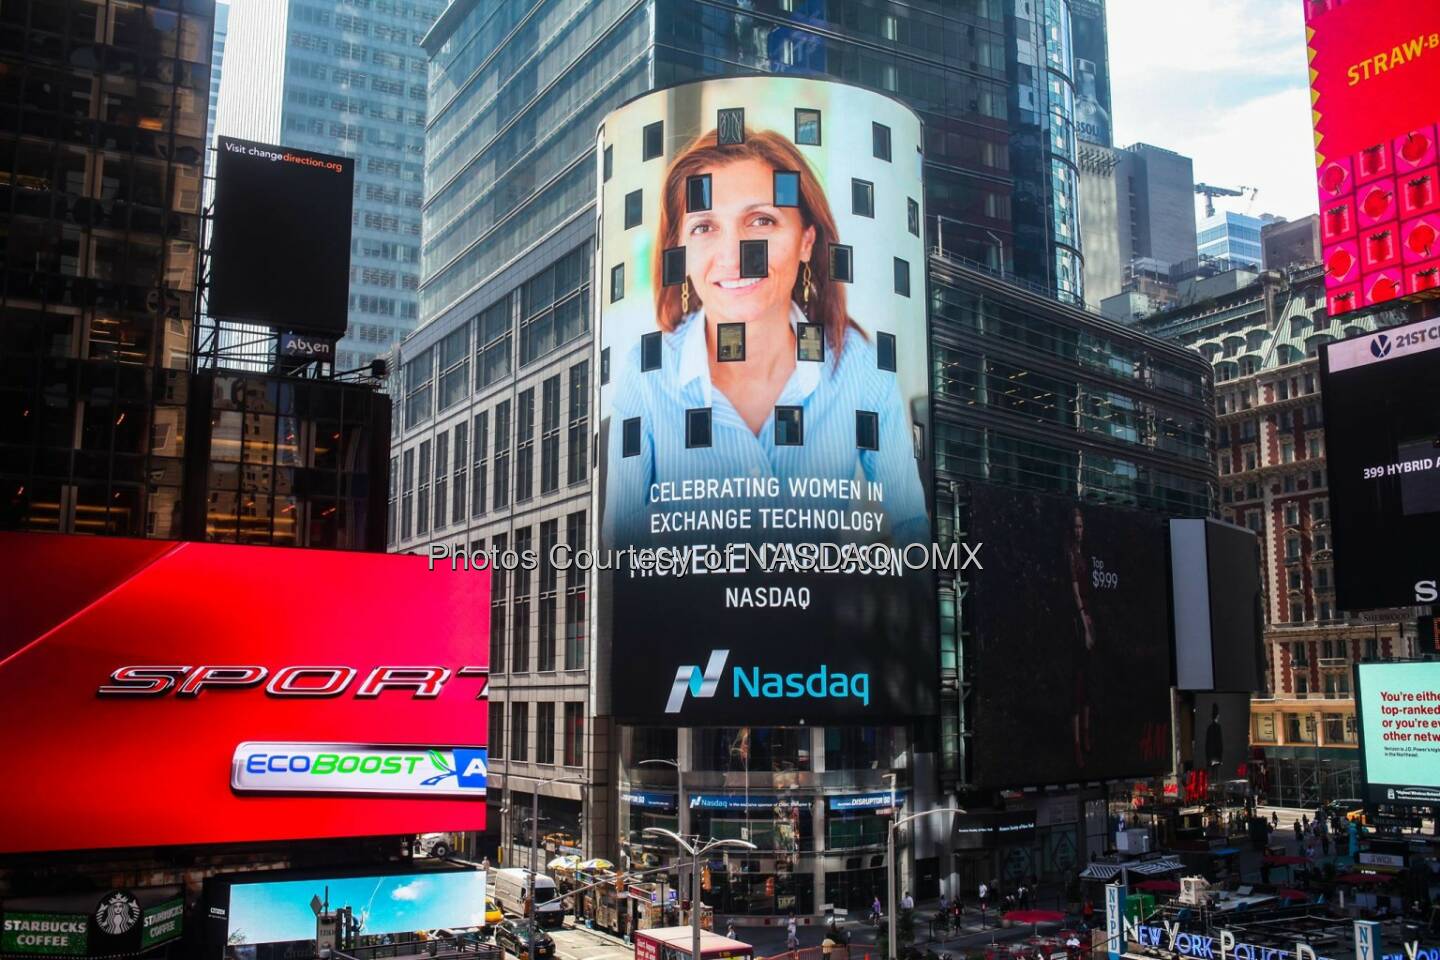 Celebrating our own Michele Carlsson, live in Times Square #WomeninTech - Read how she has become a driving force of our Tech business in the Middle East & Africa:http://spr.ly/6182BNLog  Source: http://facebook.com/NASDAQ